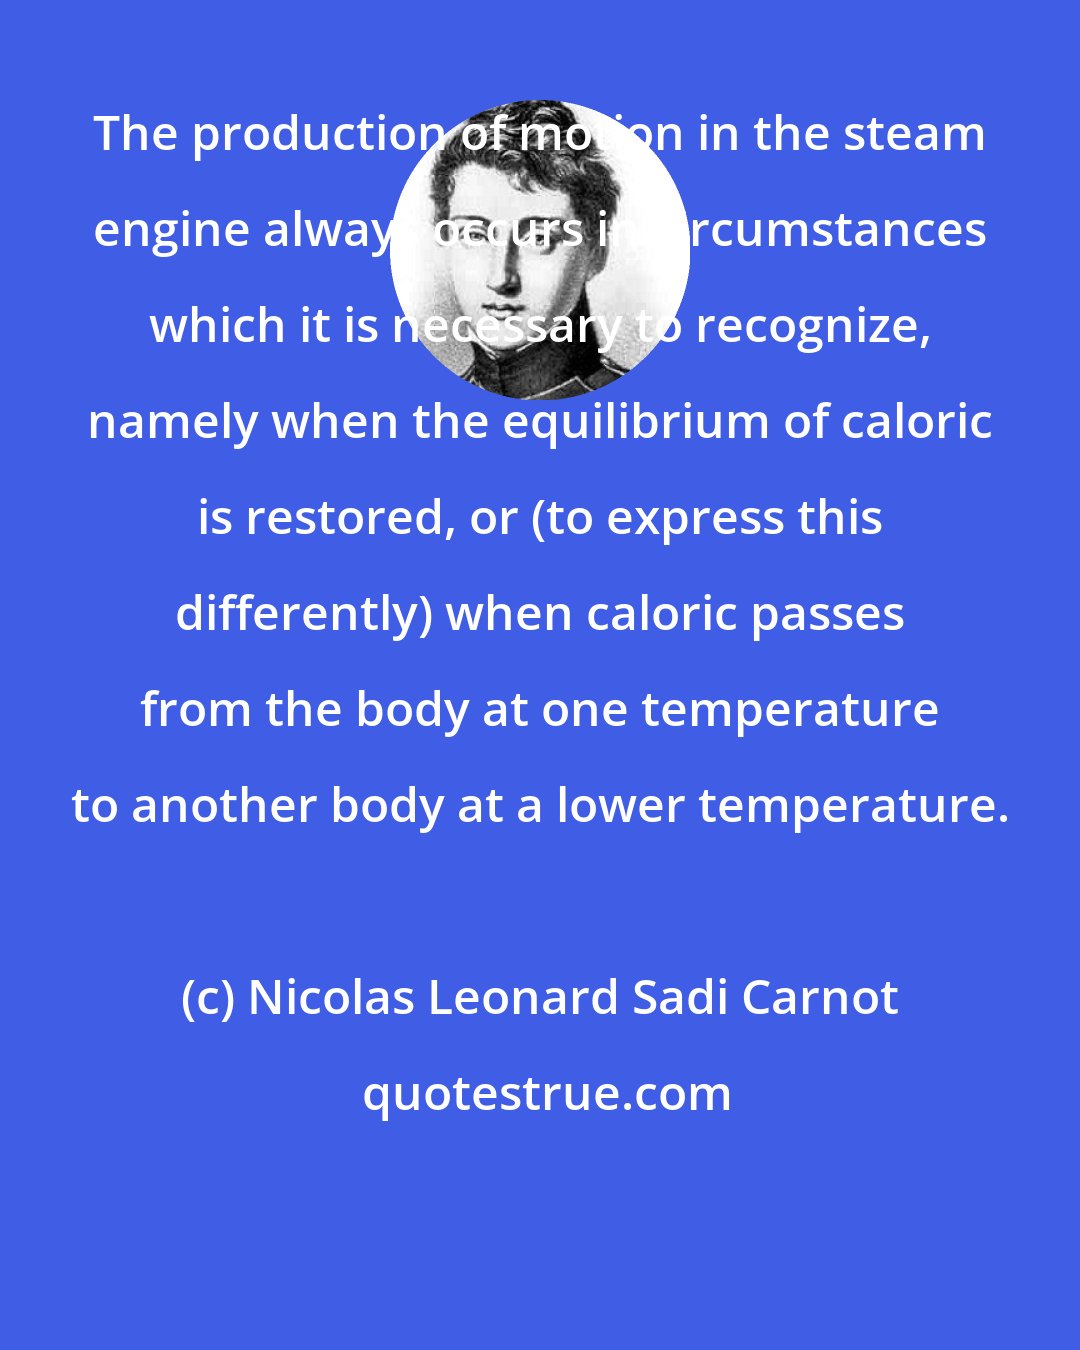 Nicolas Leonard Sadi Carnot: The production of motion in the steam engine always occurs in circumstances which it is necessary to recognize, namely when the equilibrium of caloric is restored, or (to express this differently) when caloric passes from the body at one temperature to another body at a lower temperature.